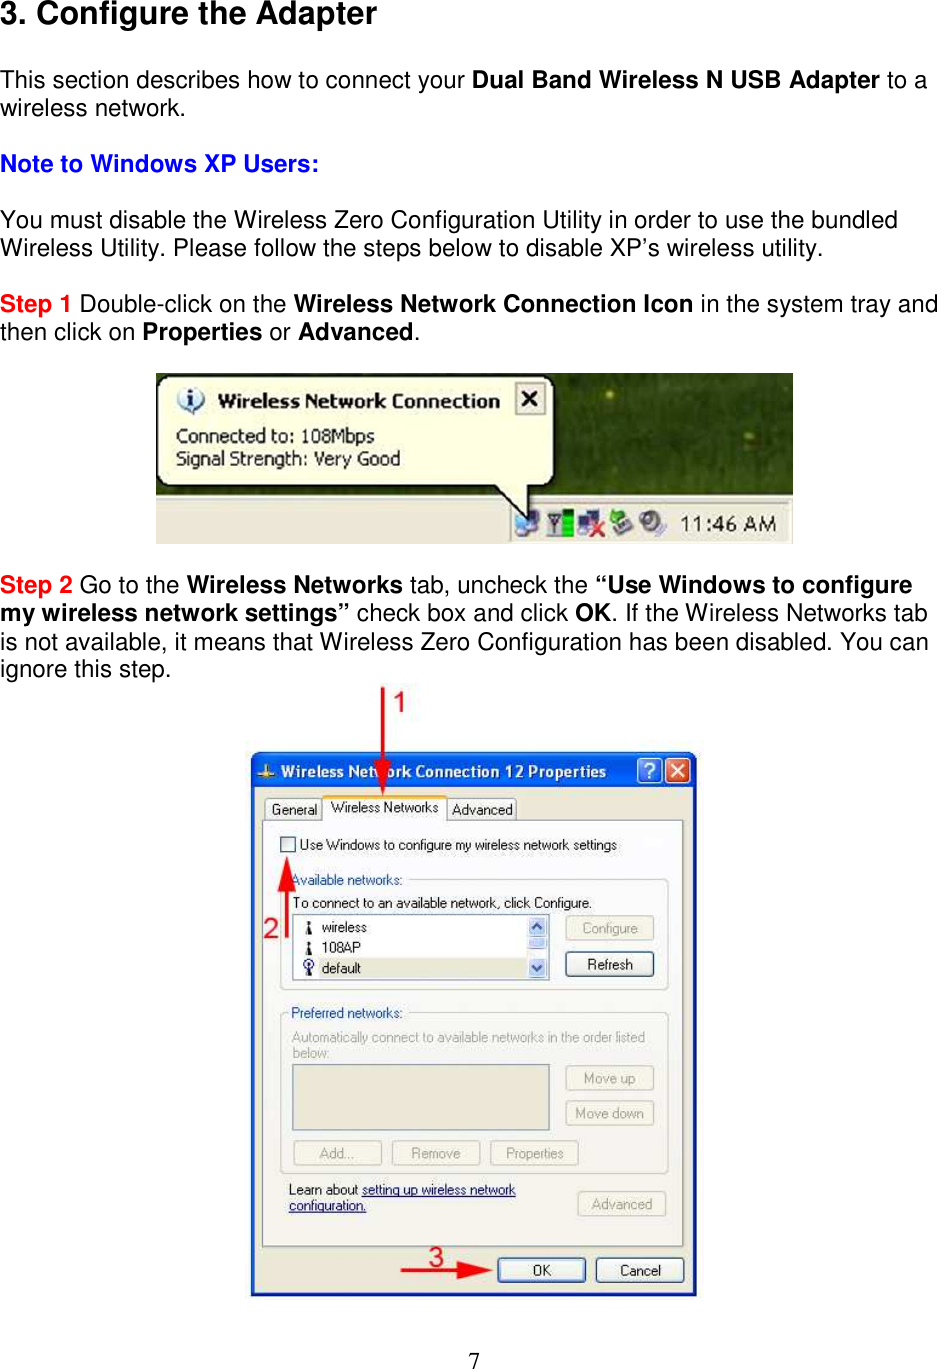 7 3. Configure the Adapter  This section describes how to connect your Dual Band Wireless N USB Adapter to a wireless network.  Note to Windows XP Users:  You must disable the Wireless Zero Configuration Utility in order to use the bundled Wireless Utility. Please follow the steps below to disable XP’s wireless utility.  Step 1 Double-click on the Wireless Network Connection Icon in the system tray and then click on Properties or Advanced.    Step 2 Go to the Wireless Networks tab, uncheck the “Use Windows to configure my wireless network settings” check box and click OK. If the Wireless Networks tab is not available, it means that Wireless Zero Configuration has been disabled. You can ignore this step.  